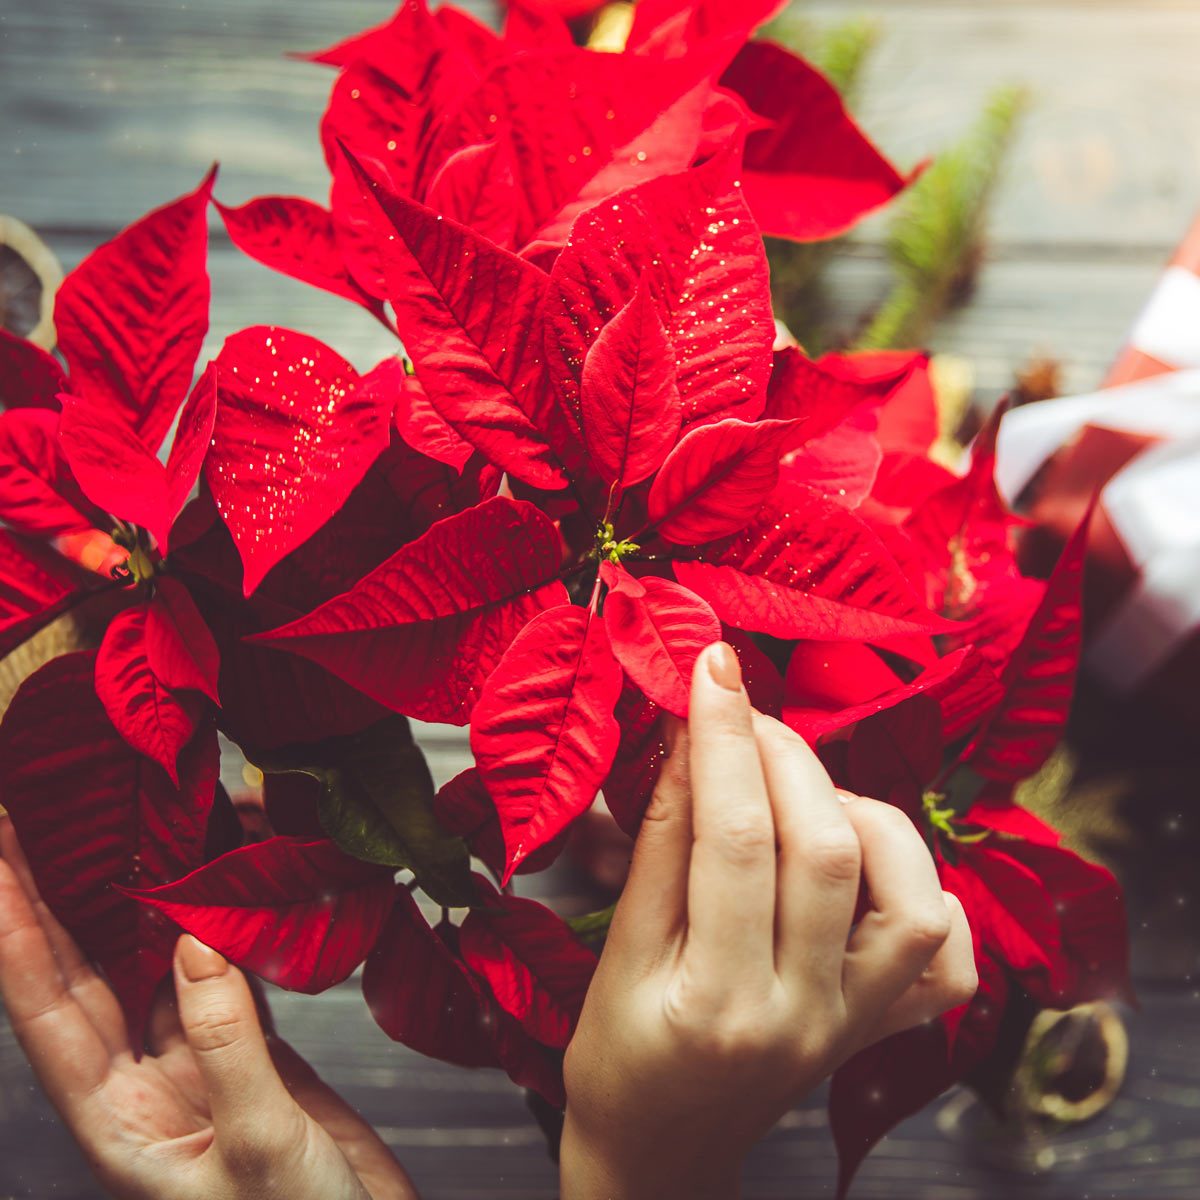 How to Care For Christmas Flowers